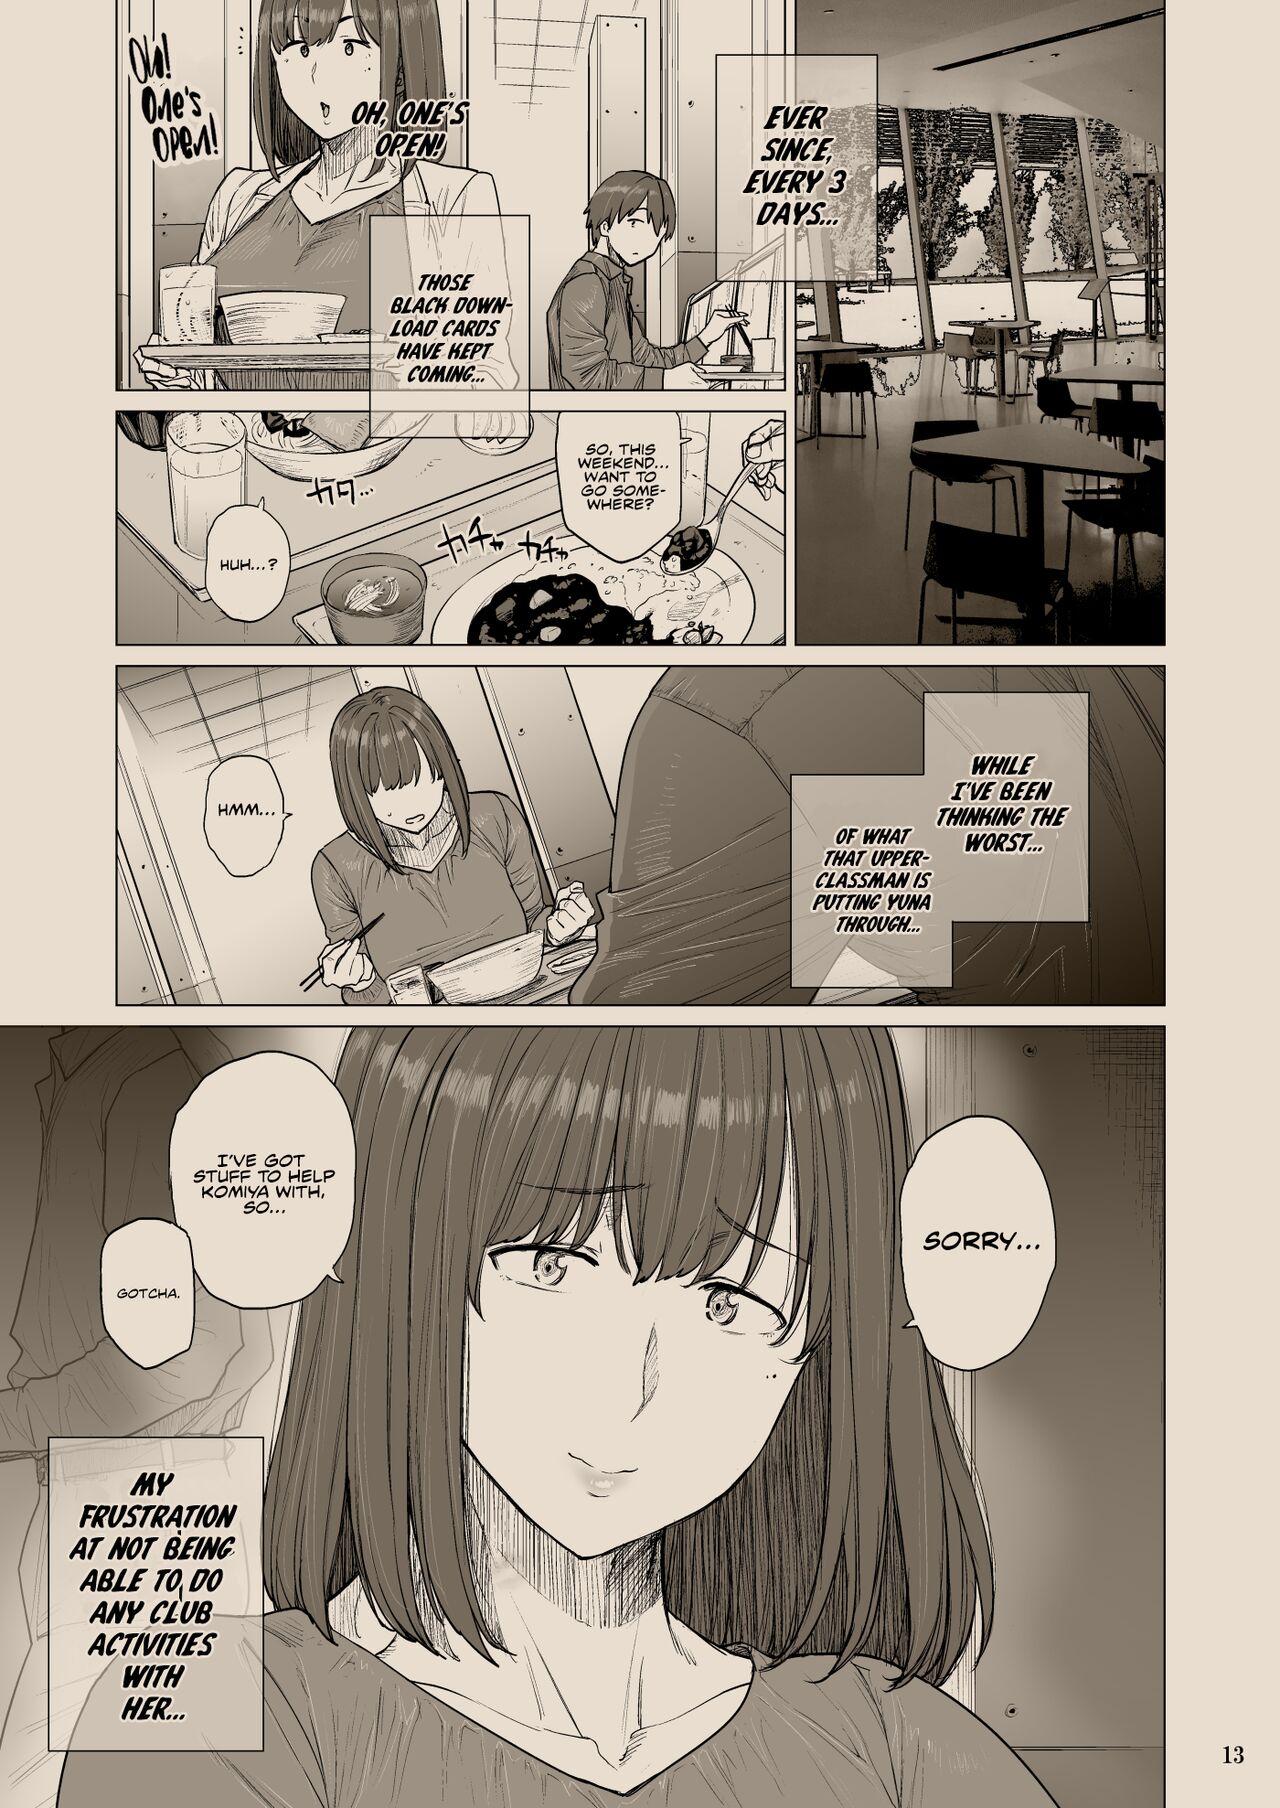 Blows B.S.S.² - My Smart, Beautiful Childhood Friend That I Loved First Became an Assistant of an Upperclassman’s Club and He Did Whatever He Pleased to Her - Original Amateur Cum - Page 12